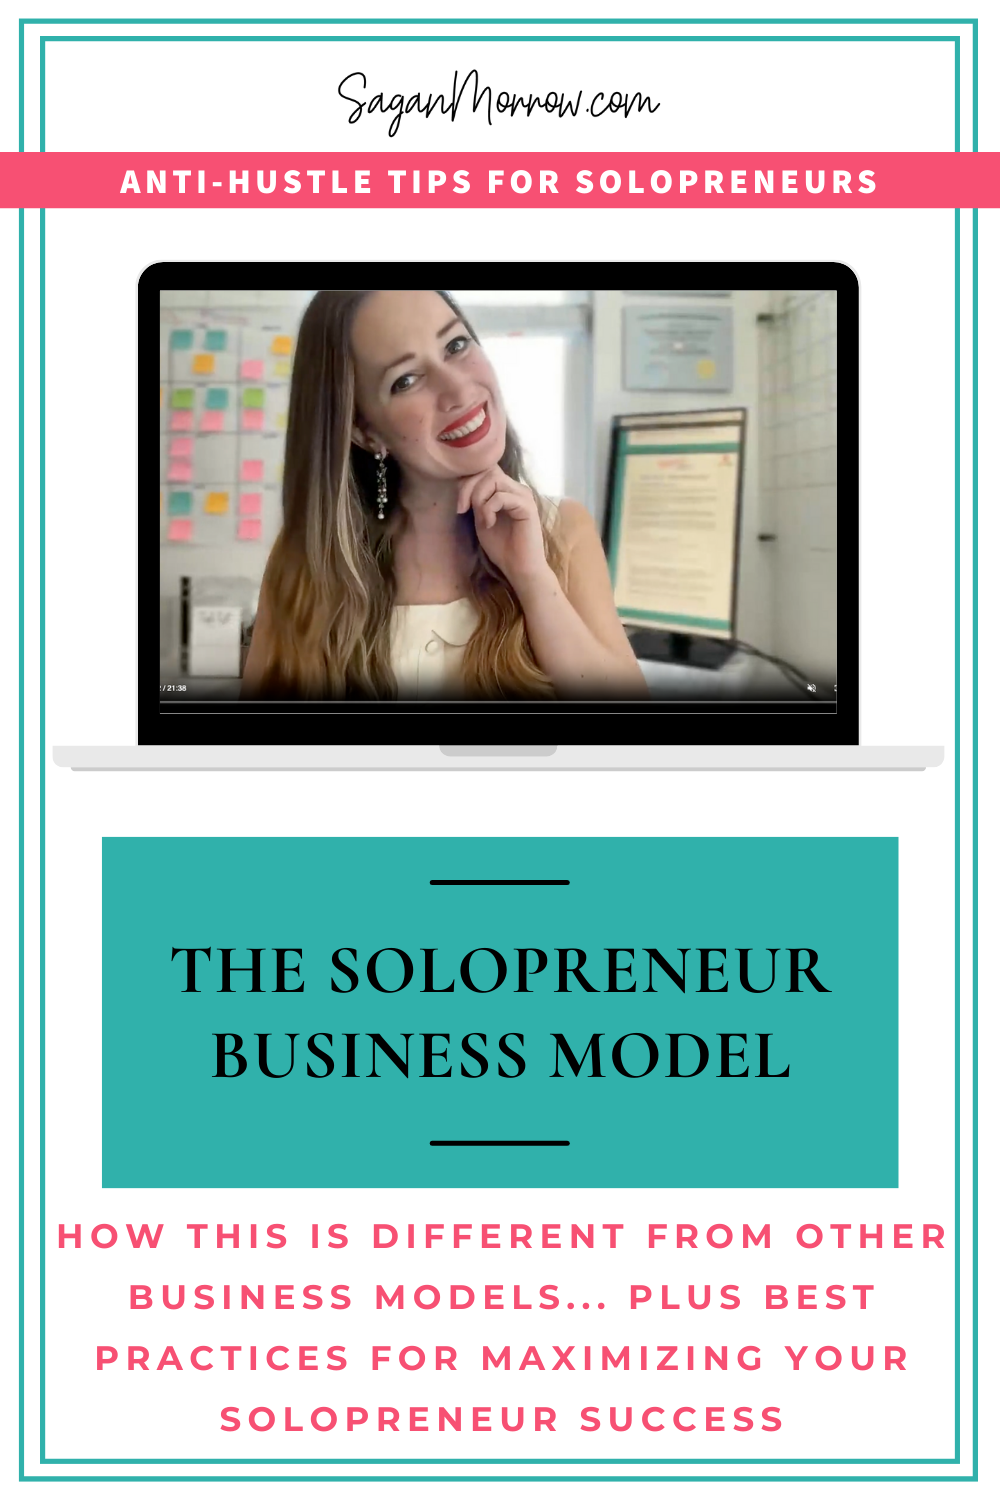 The solopreneur business model... Are you curious about what a solopreneur business model looks like and how you can make the most of it? In this video, we address what makes the solopreneur business model so different from other business models, plus 5 tips and best practices for increasing success with your solopreneur business model!